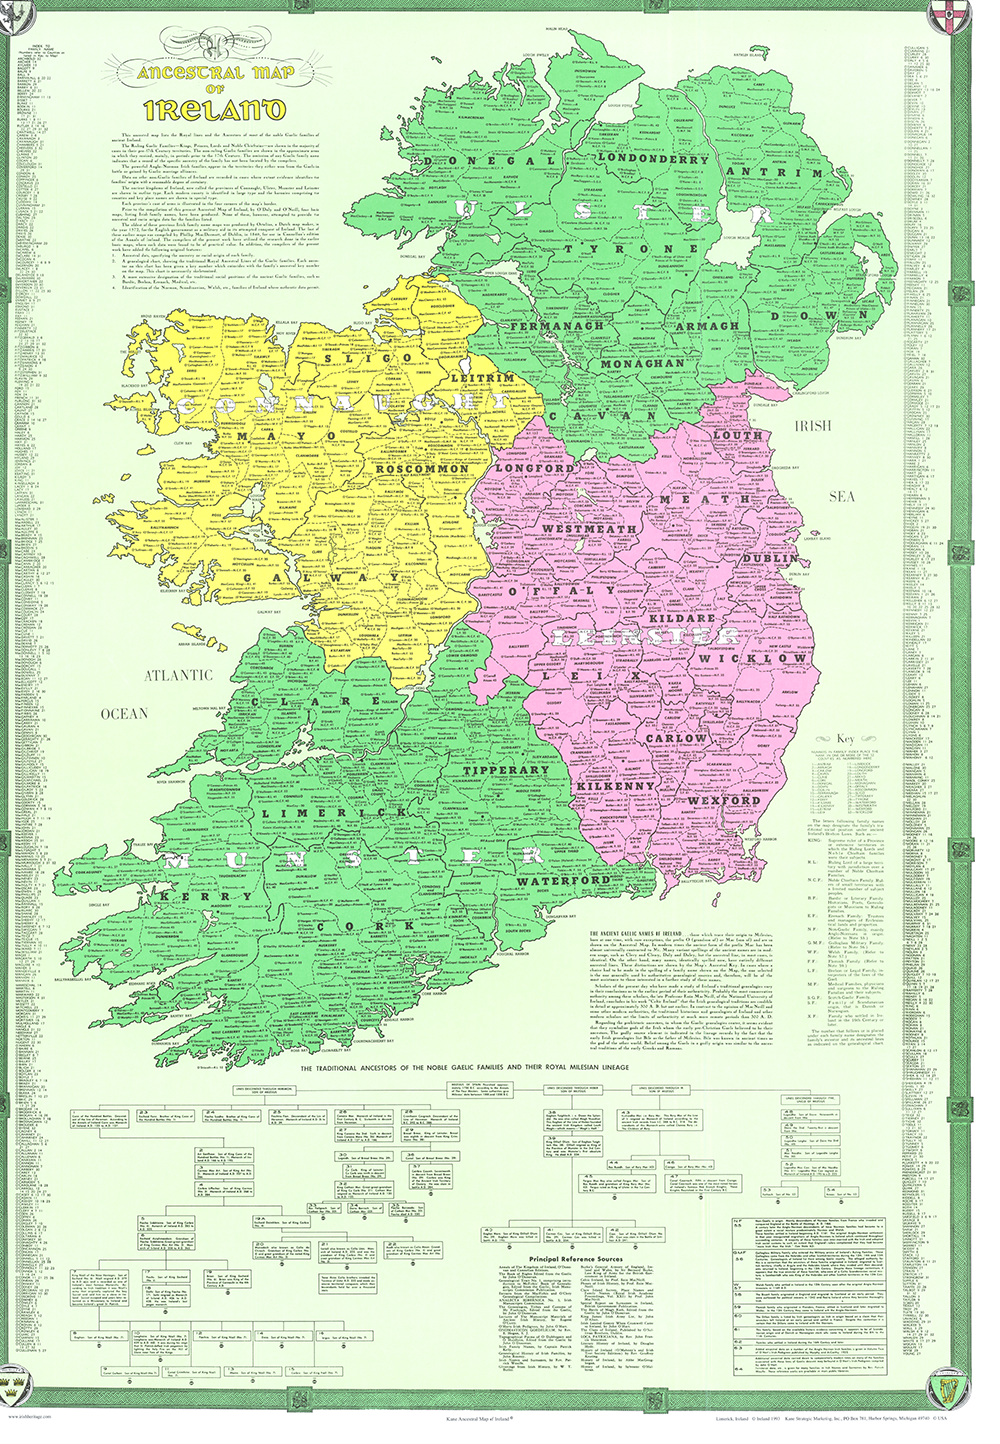 The Kane Ancestral Map of Ireland